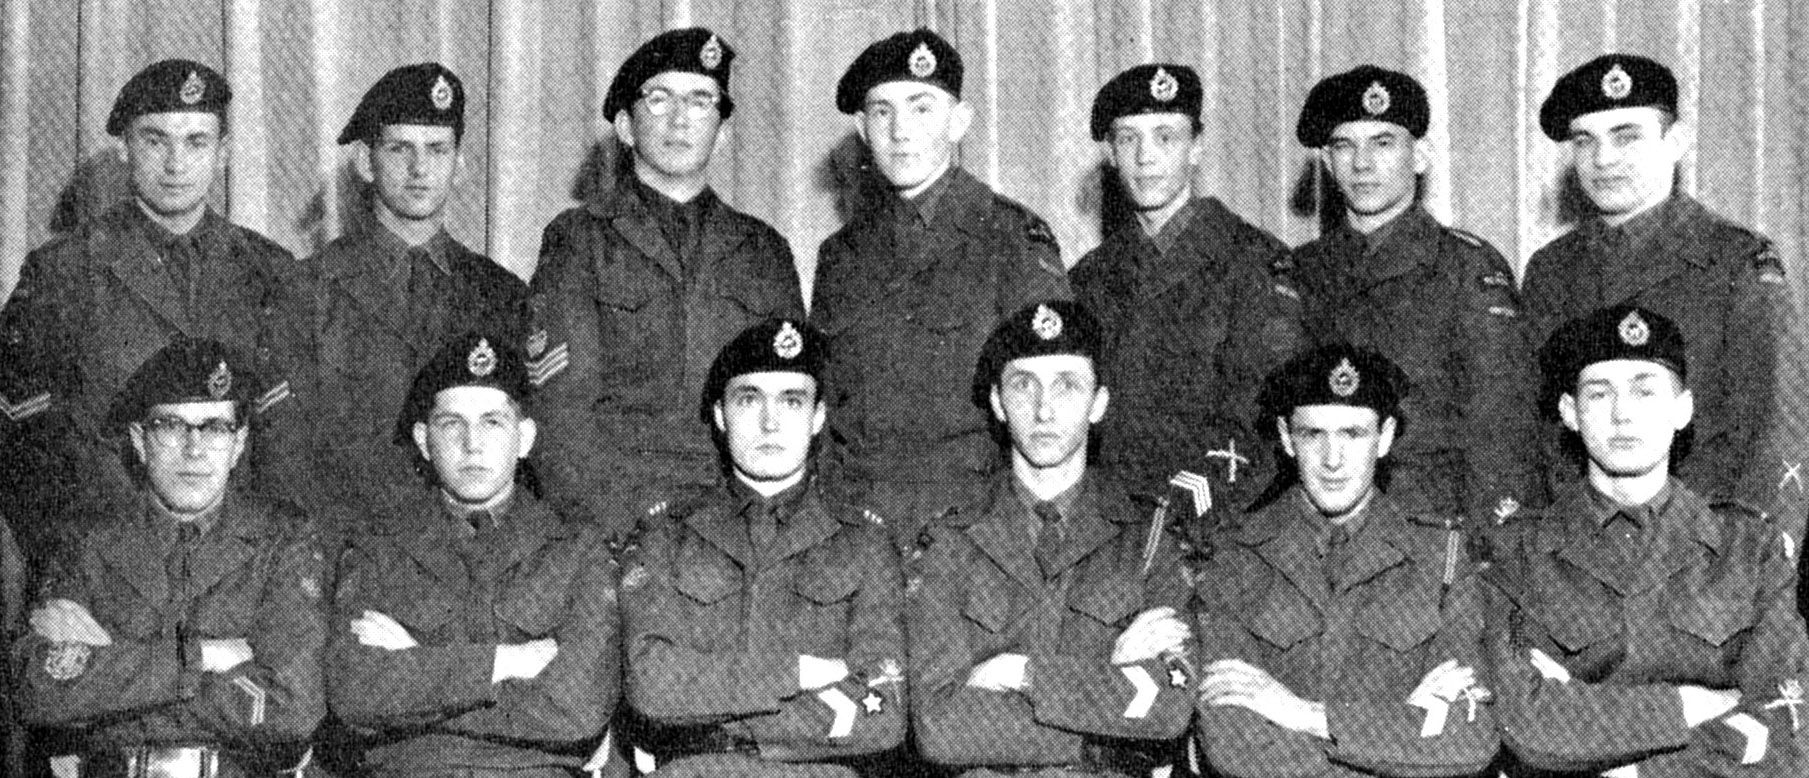 (Click to magnify) FRONT ROW: Sgt. Major D. Arbuckle, Lt. J. Sargeant, Major J. Kennedy, Captain J. Campbell, Lt. C. Todd, Lt. G. Feasby; BACK ROW: Cpl. J.M. Taylor, Cpl K. Cornell, Staff Sgt. N. Taylor, Sgt, K May, Sgt. A. Keating, Sgt. J. Risebrough, Sg